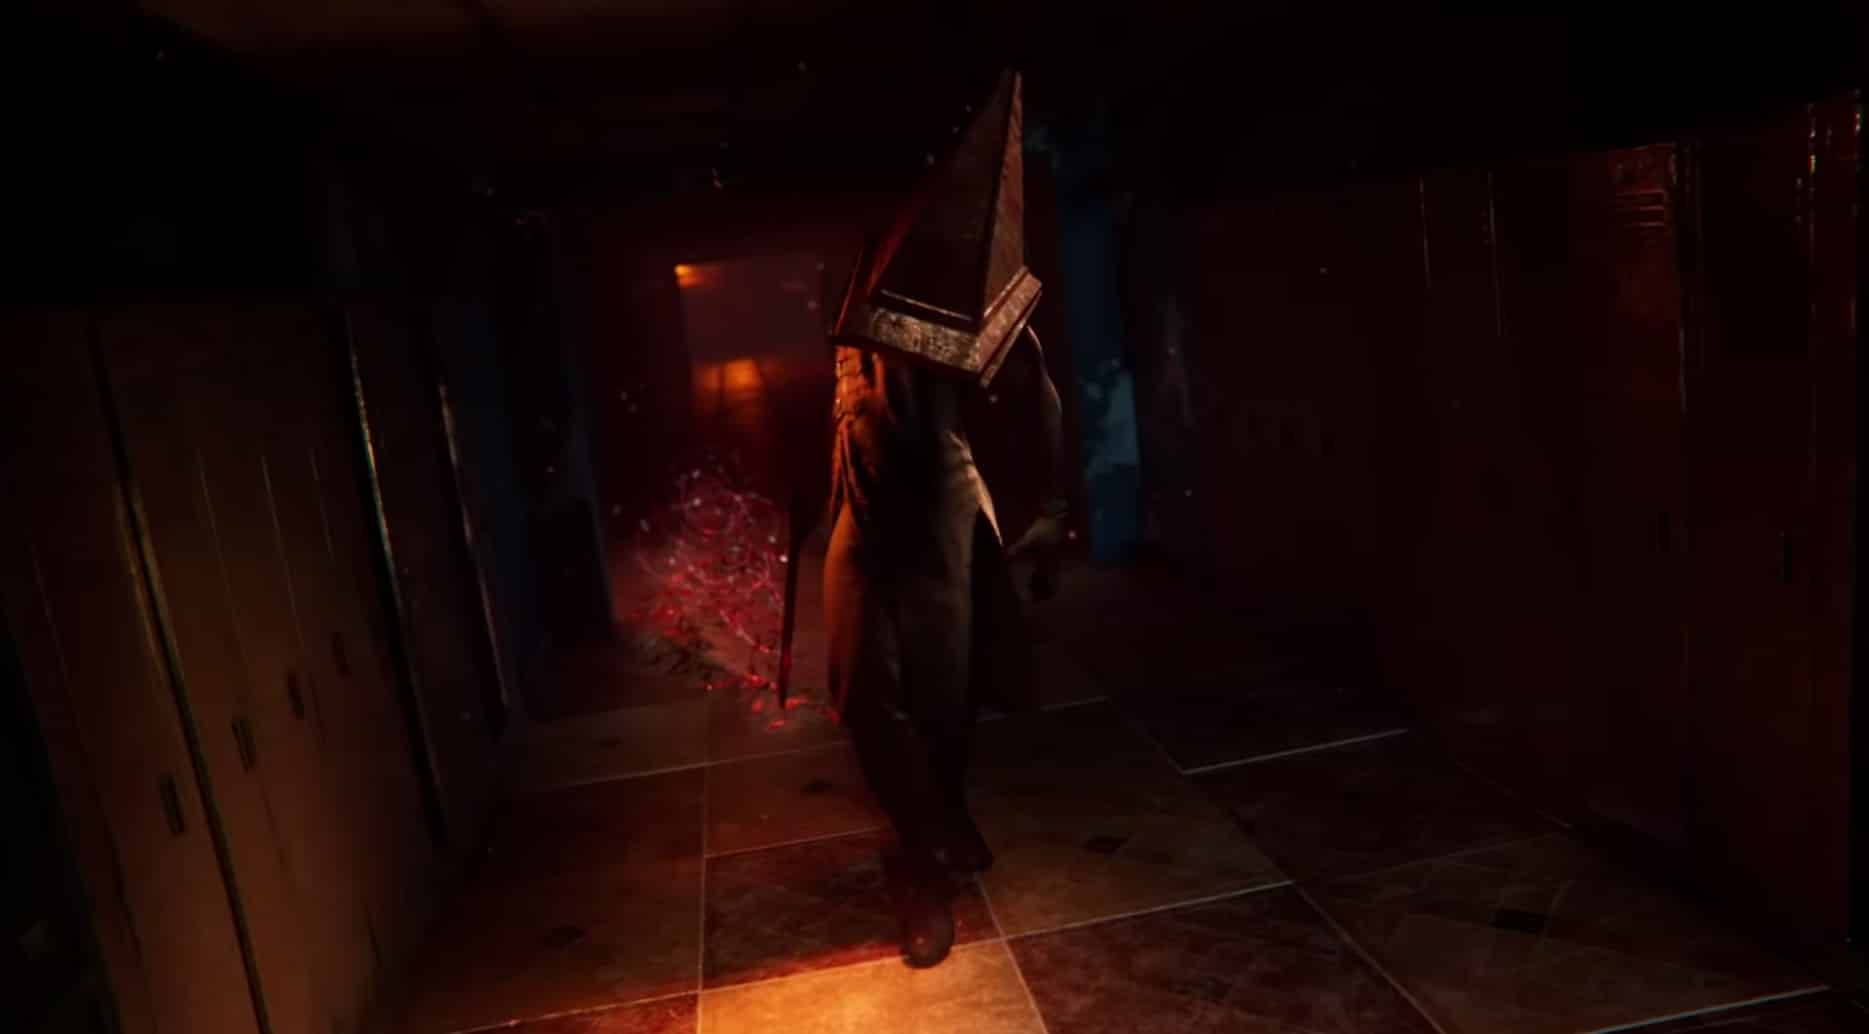 Silent Hill's Pyramid Head is Dead by Daylight's next killer